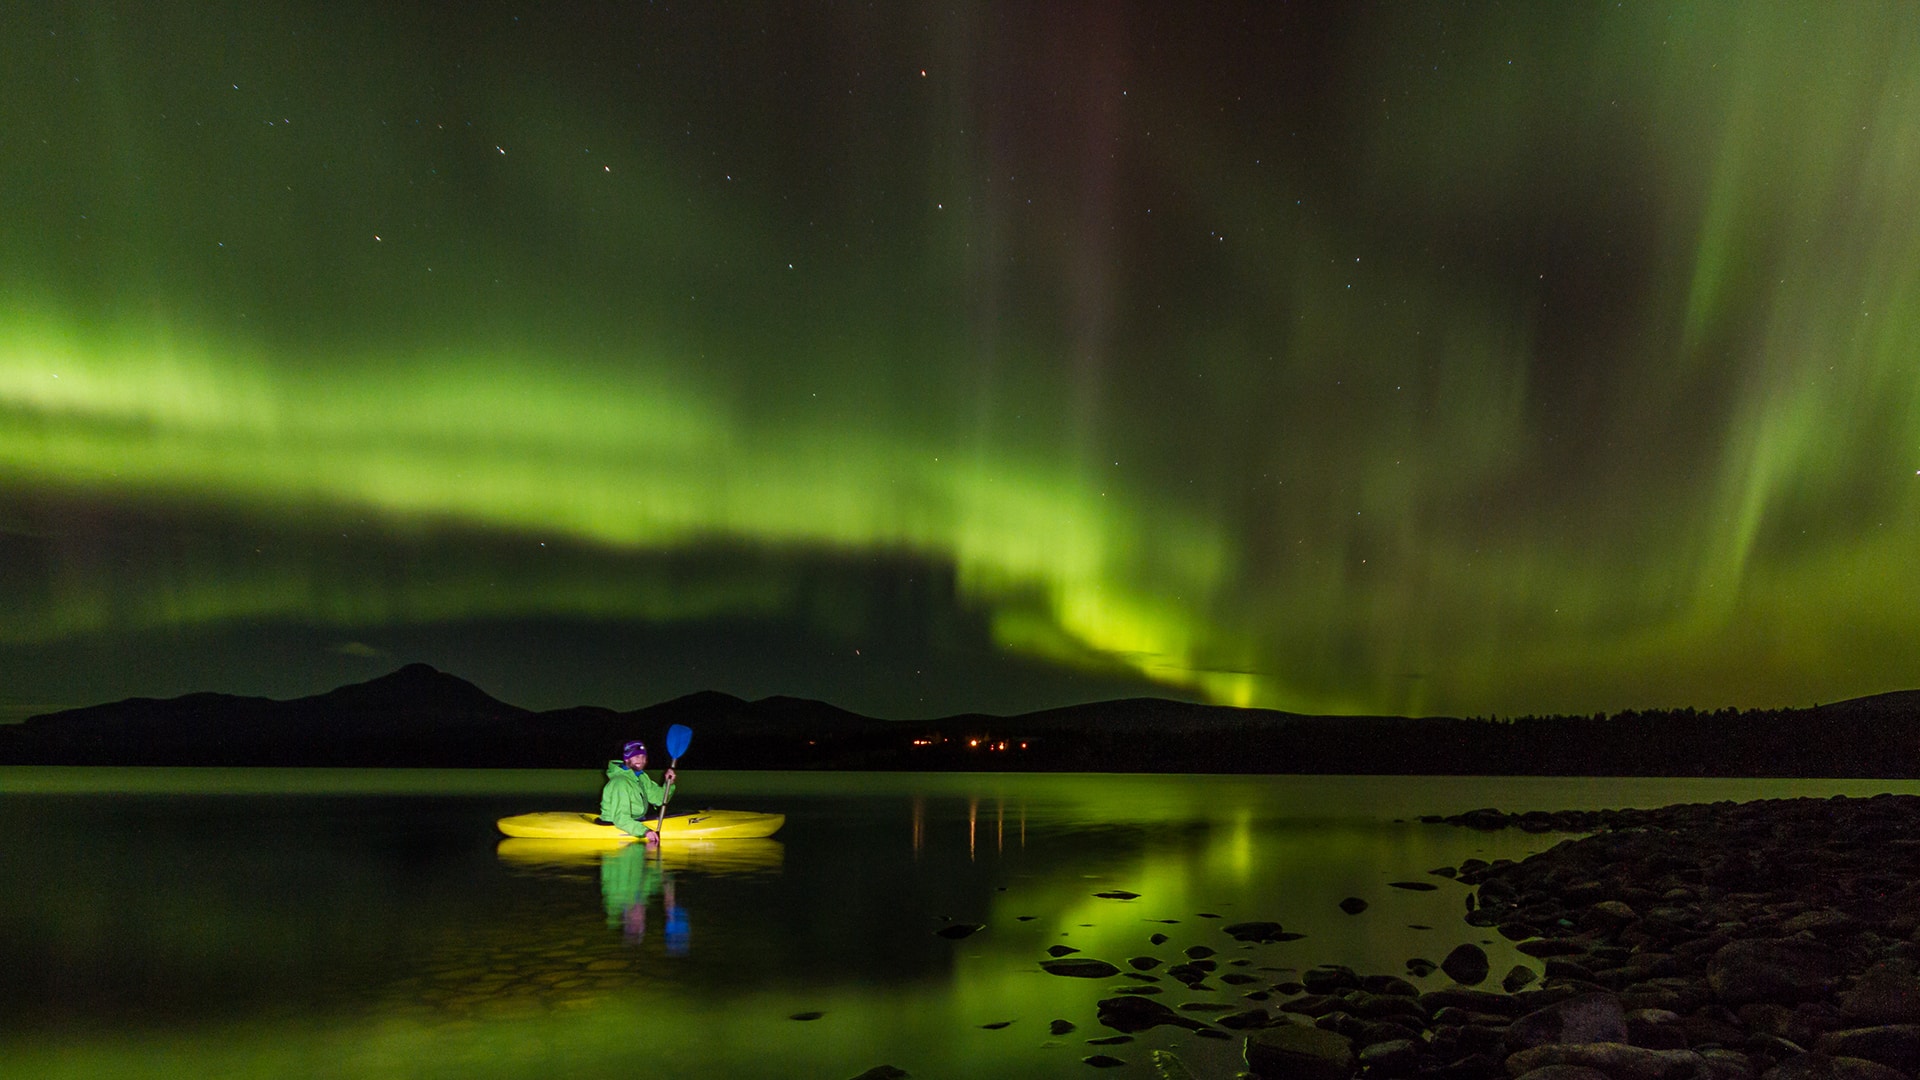 A person paddling in a kayak surrounded by northern lights reflecting in the lake.